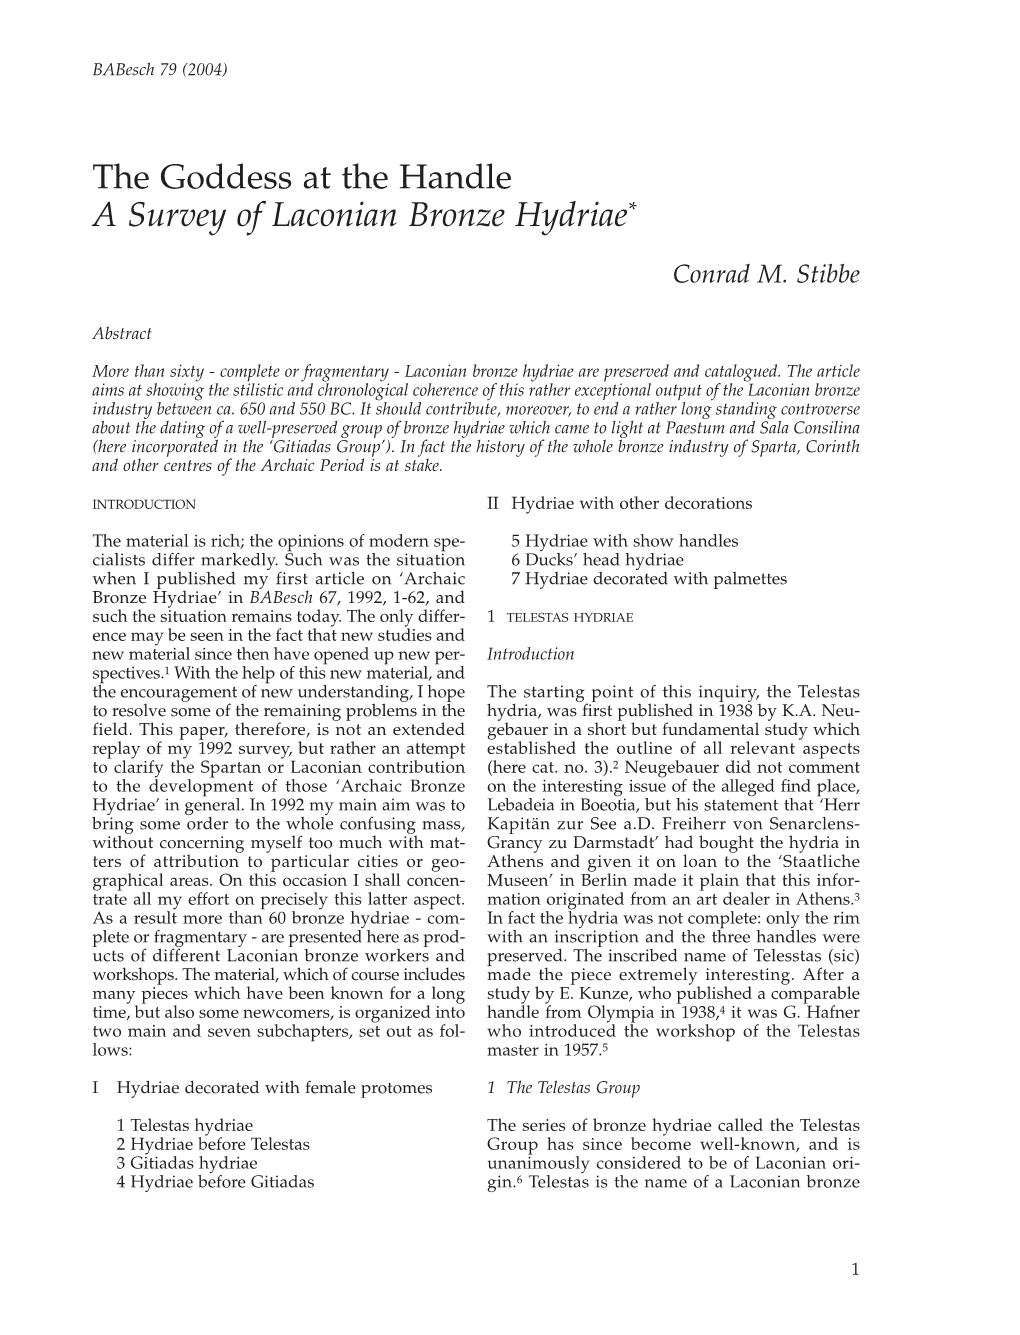 The Goddess at the Handle a Survey of Laconian Bronze Hydriae*